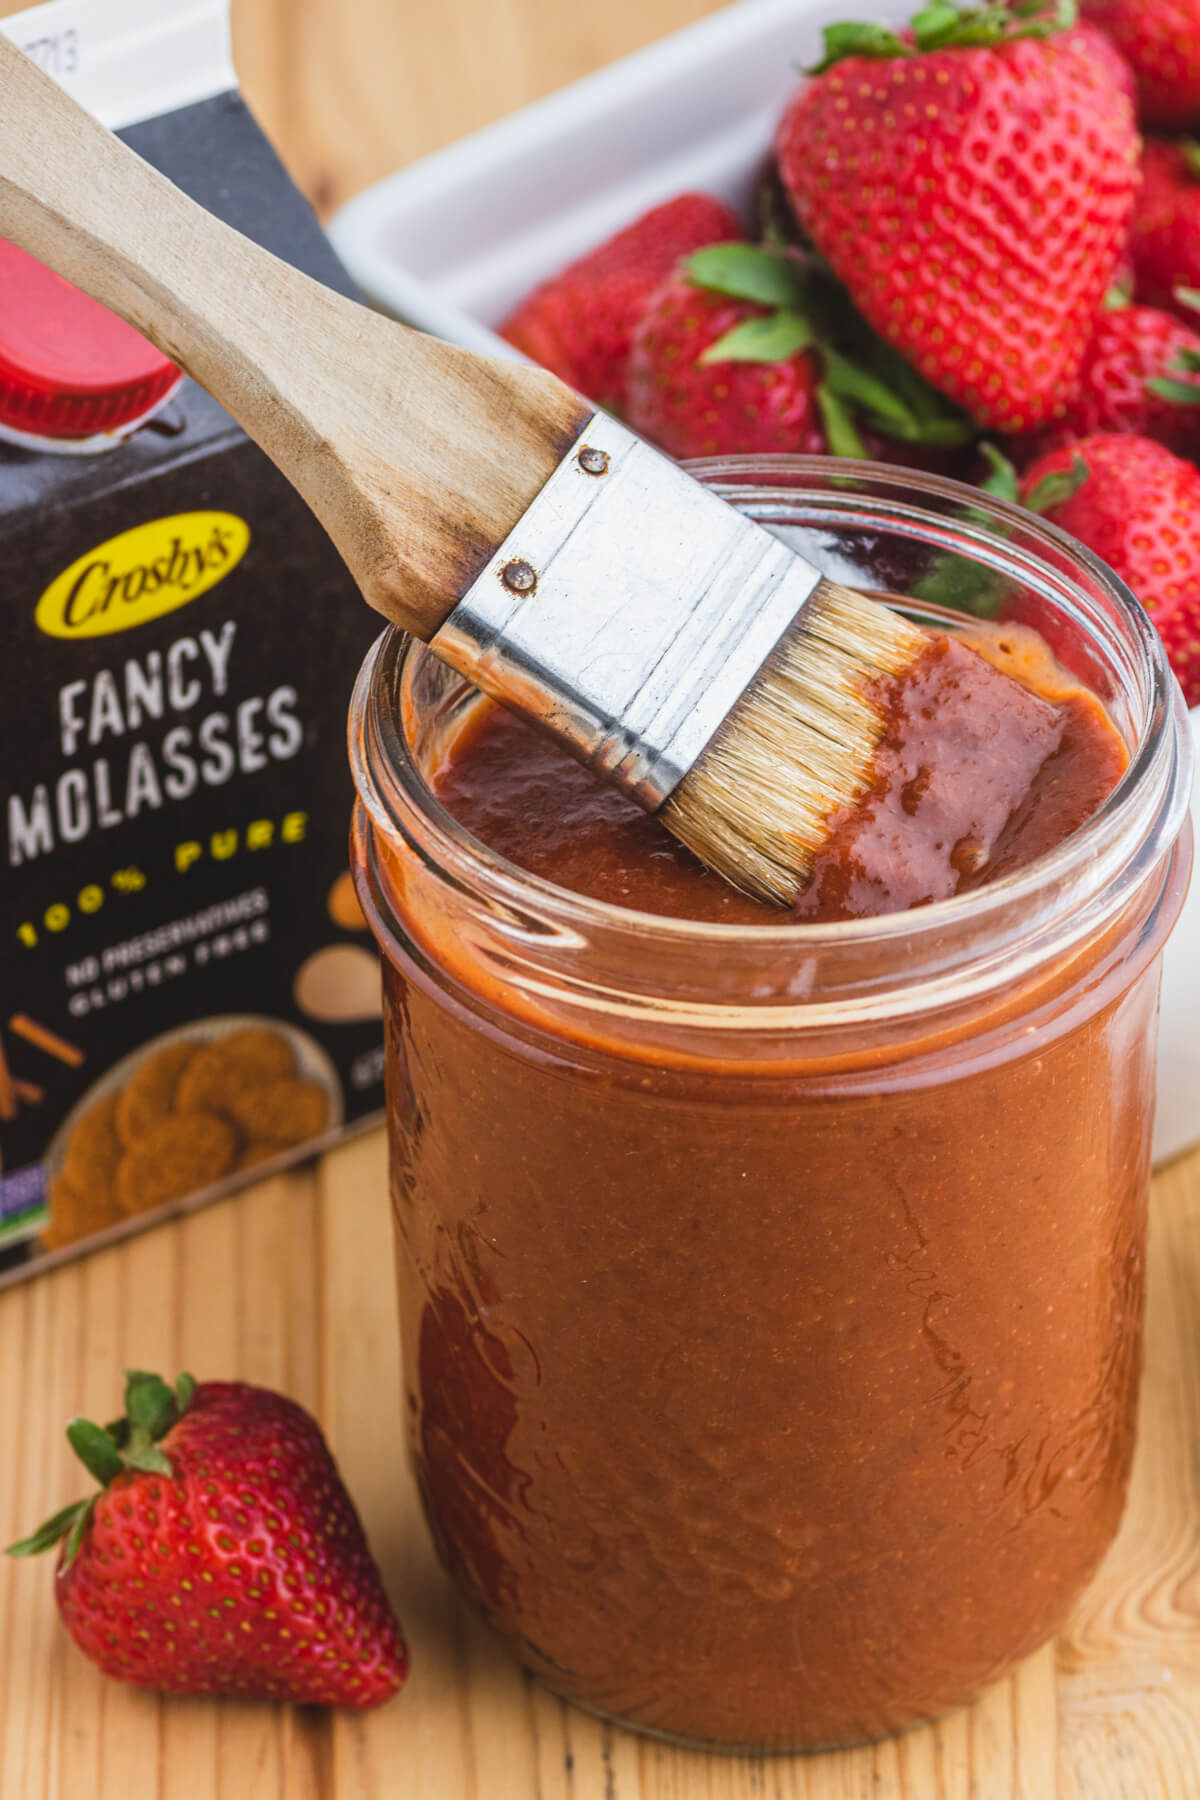 A brush sits in a jar of barbecue sauce surrounded by strawberries, garlic and a package of fancy molasses.